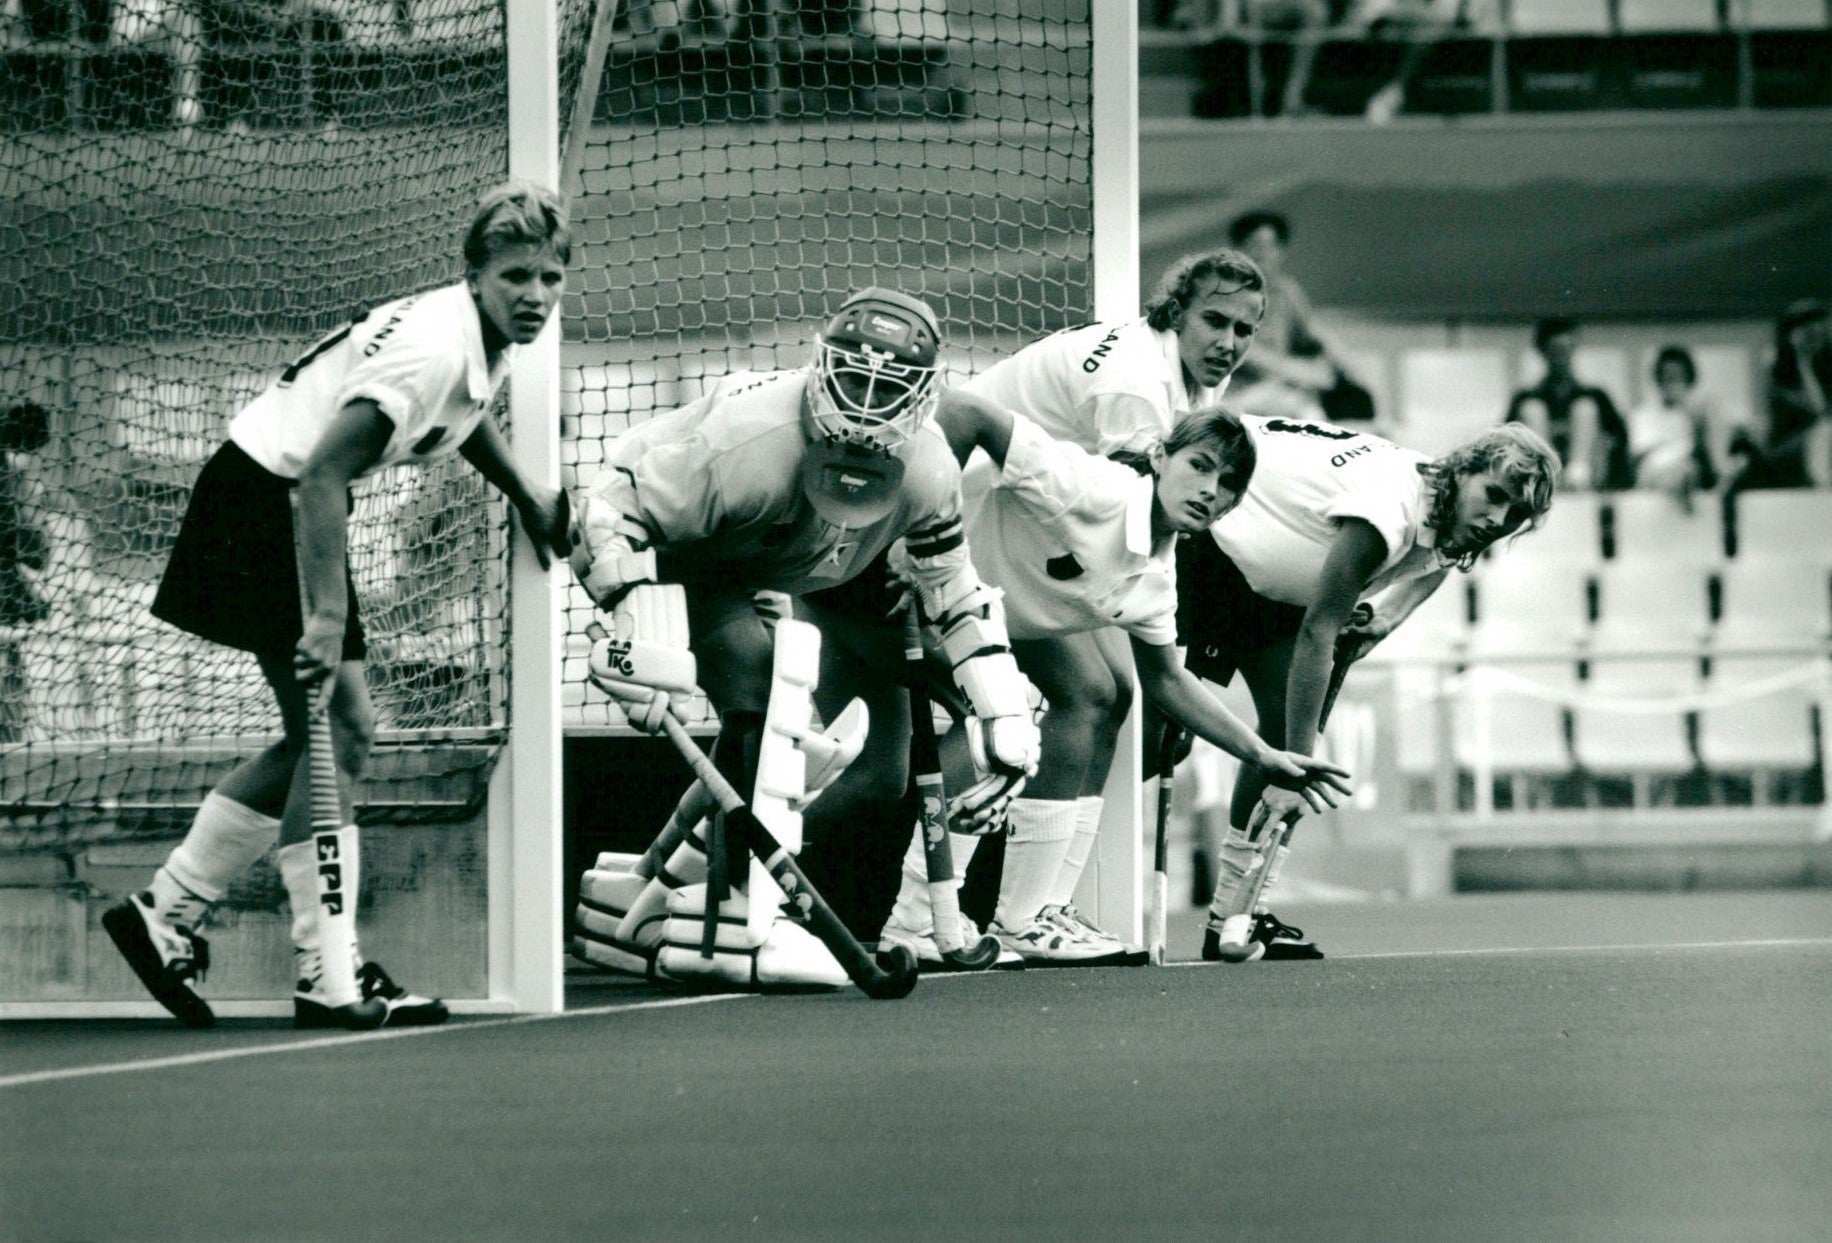 A unified German hockey team went on to win gold, Barcelona 1992